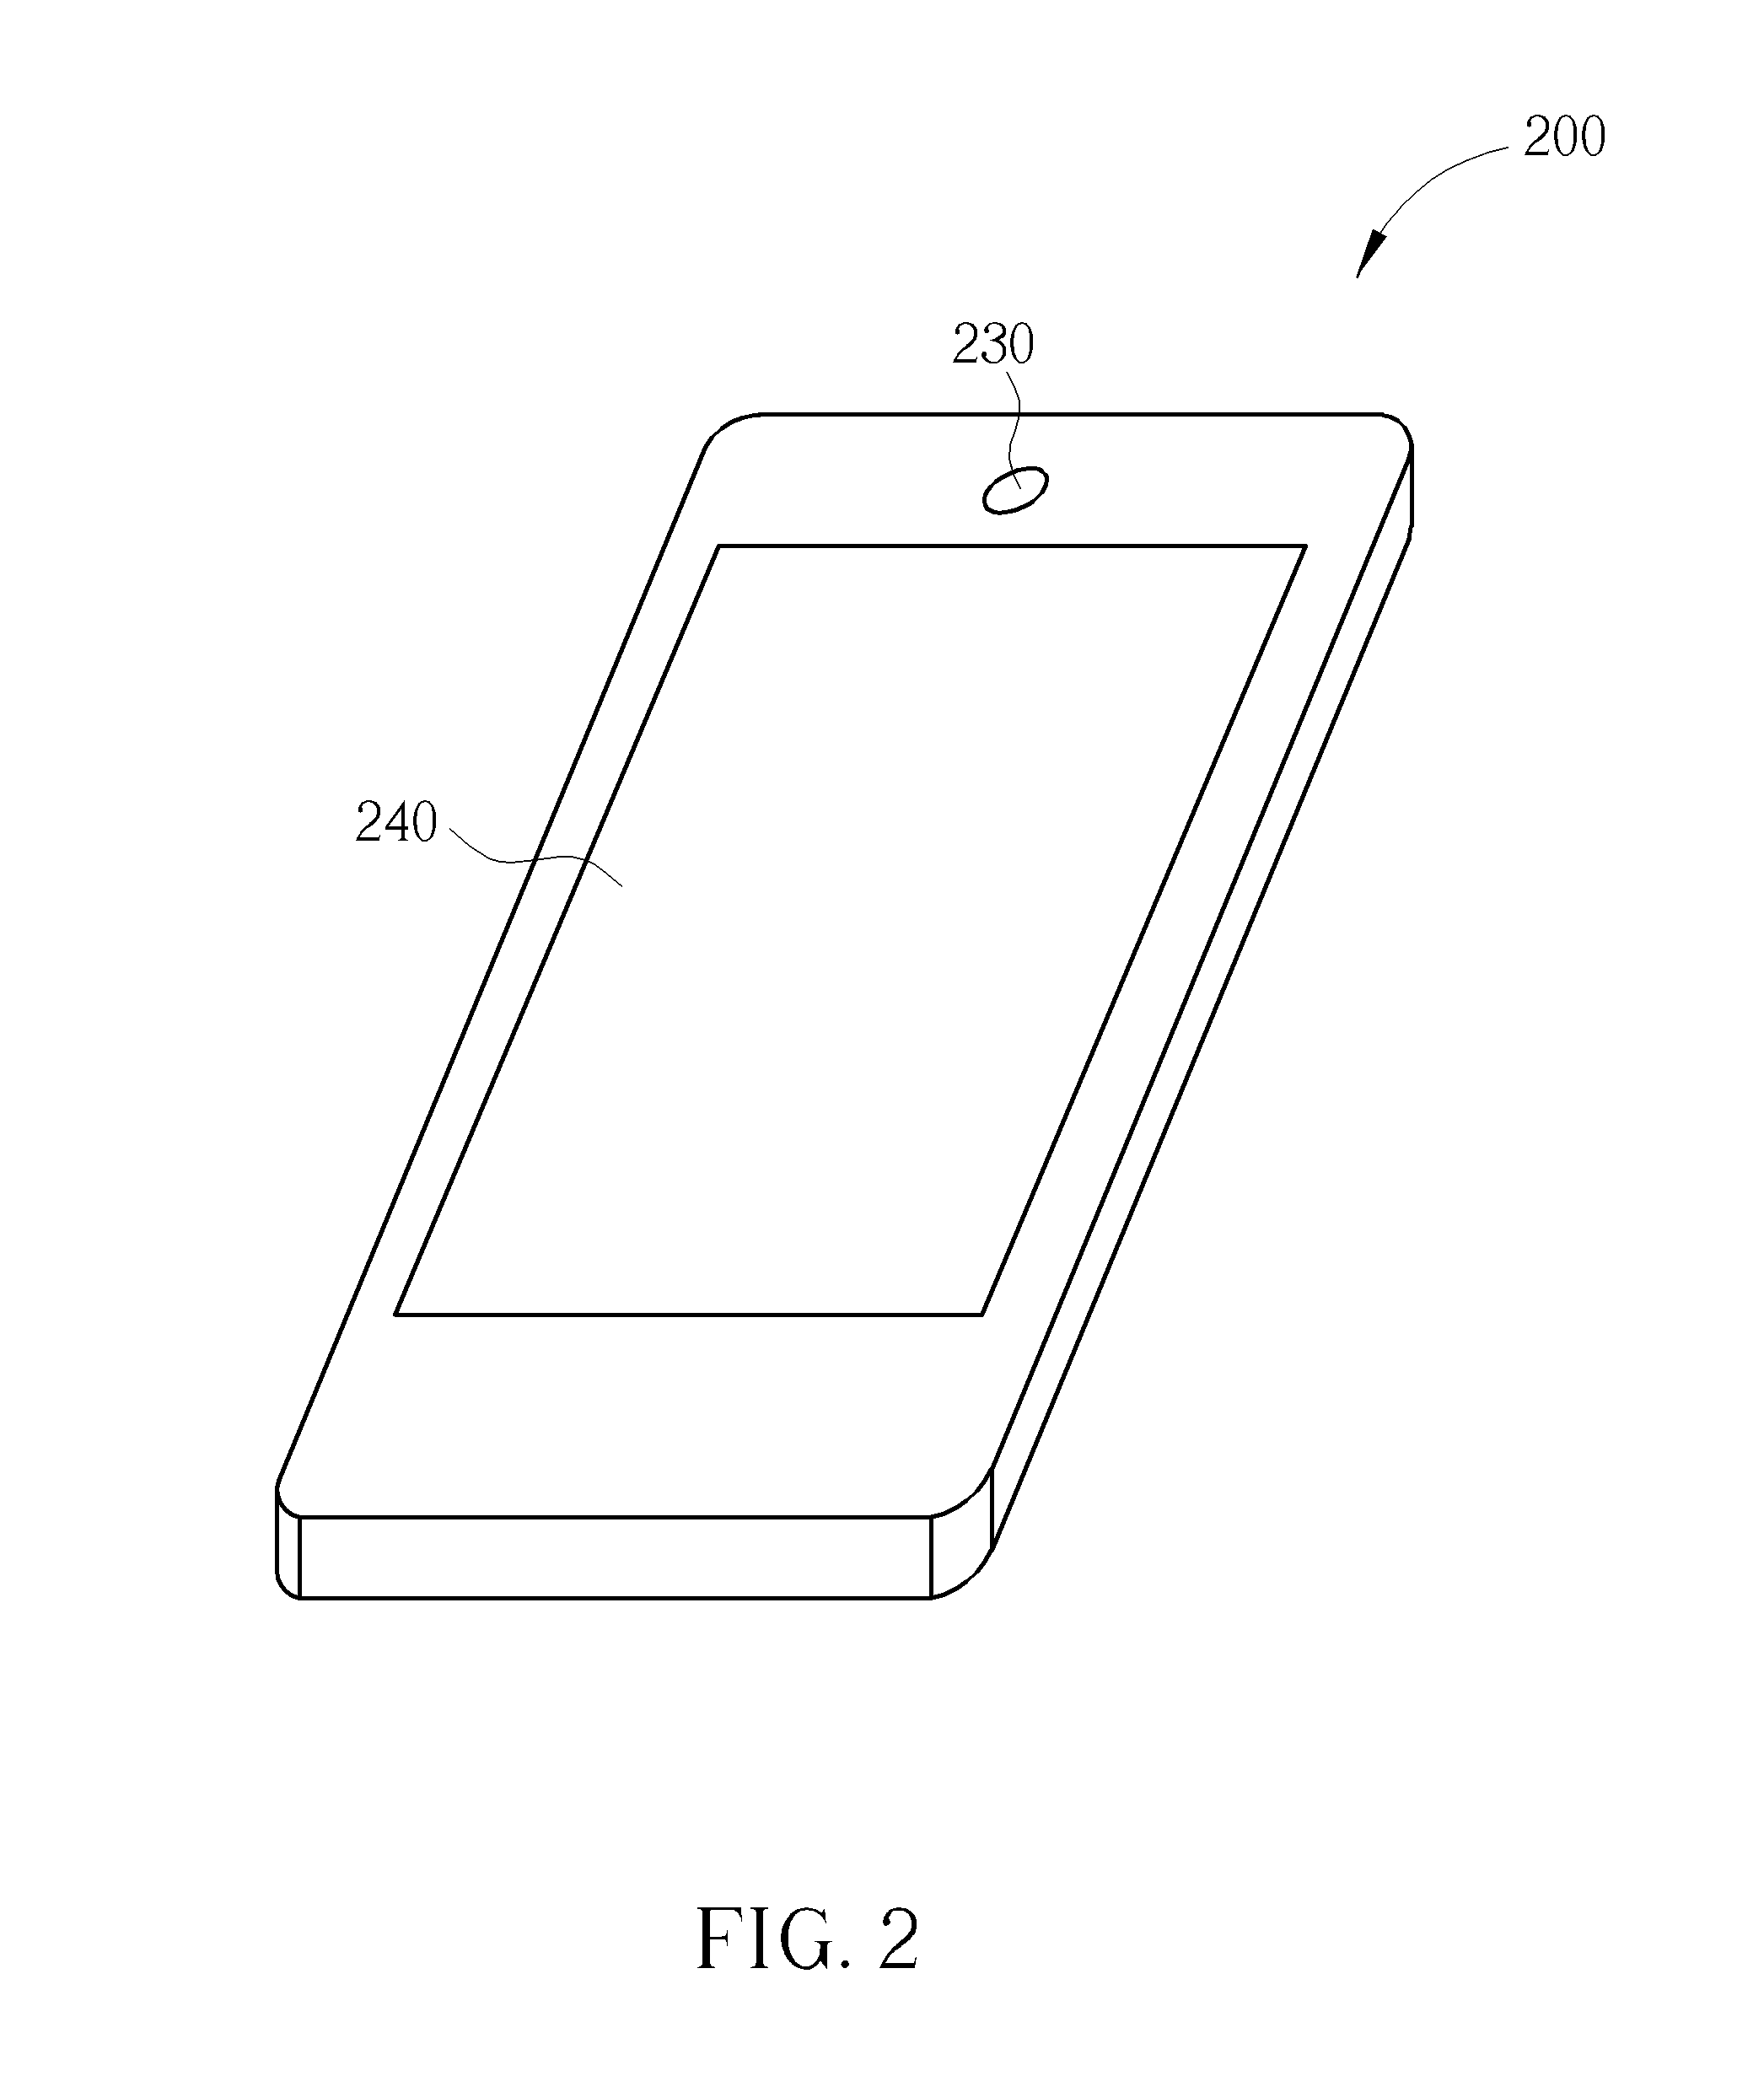 Method for performing application wake-up management for a portable device by classifying one application wake-up event of a plurality of application wake-up events as a triggering event for the other application wake-up events